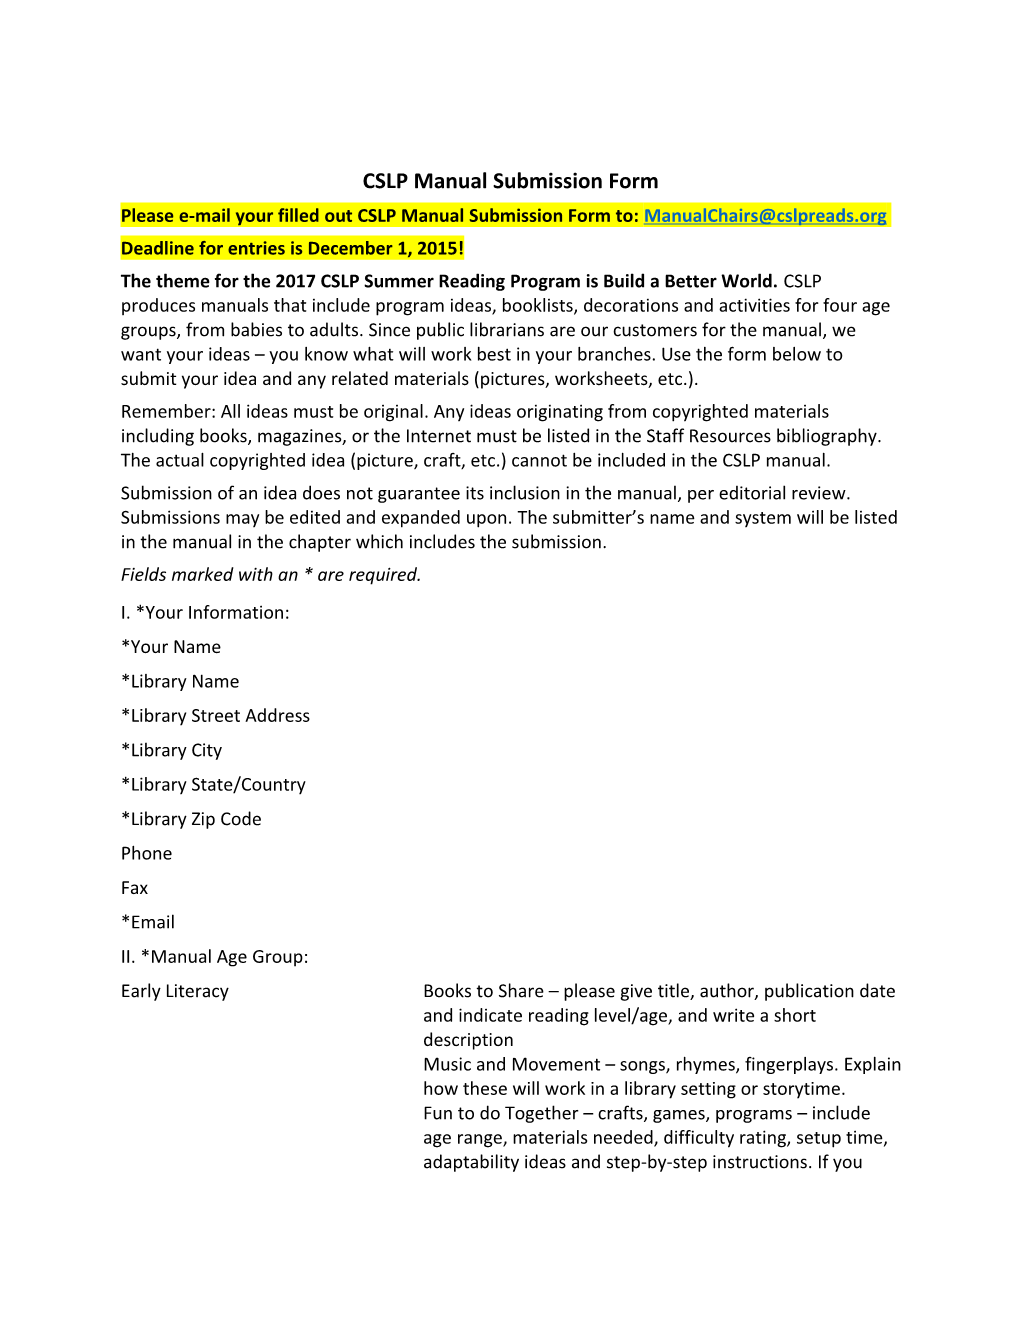 CSLP Manual Submission Form